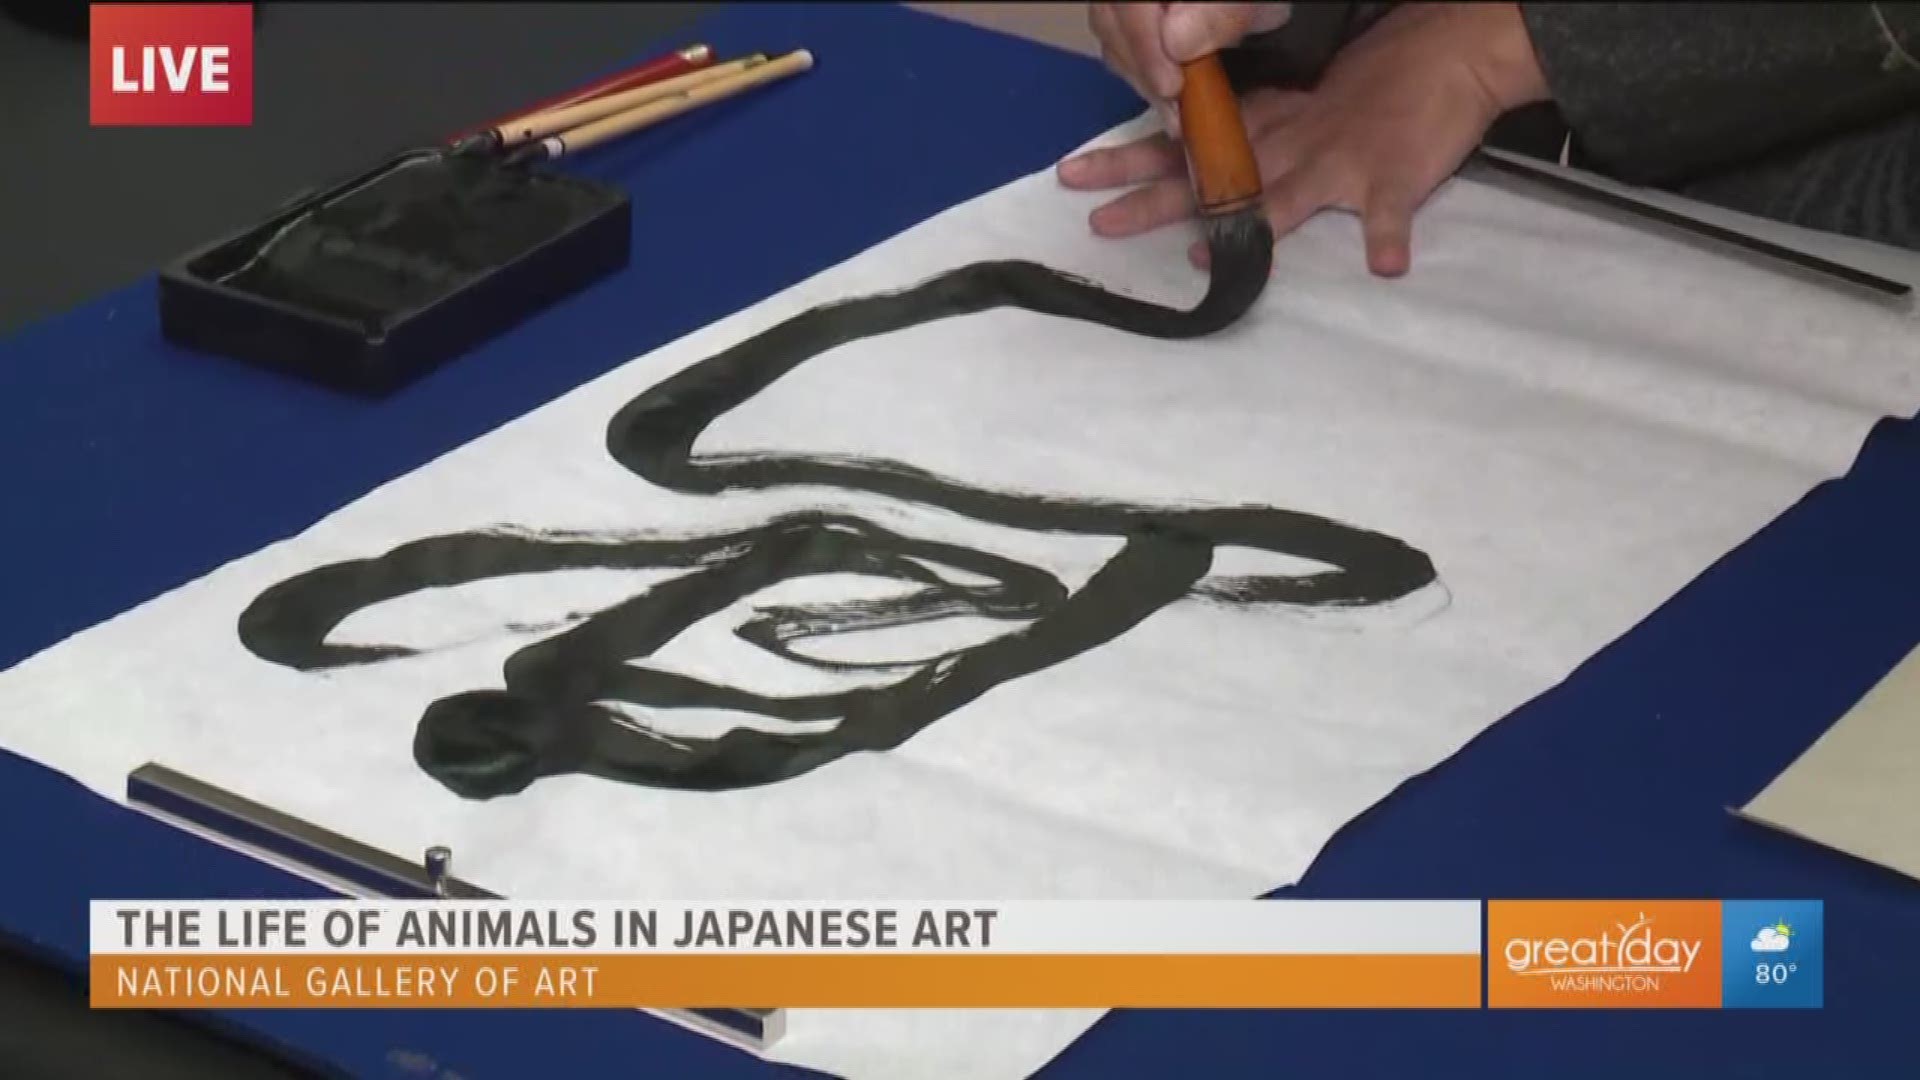 China Satomi Pirrone creates calligraphy at the National Gallery of Art. Pirrone will be present at the Animals in the Japanese Art at the National Gallery of Art this weekend June 22-23.